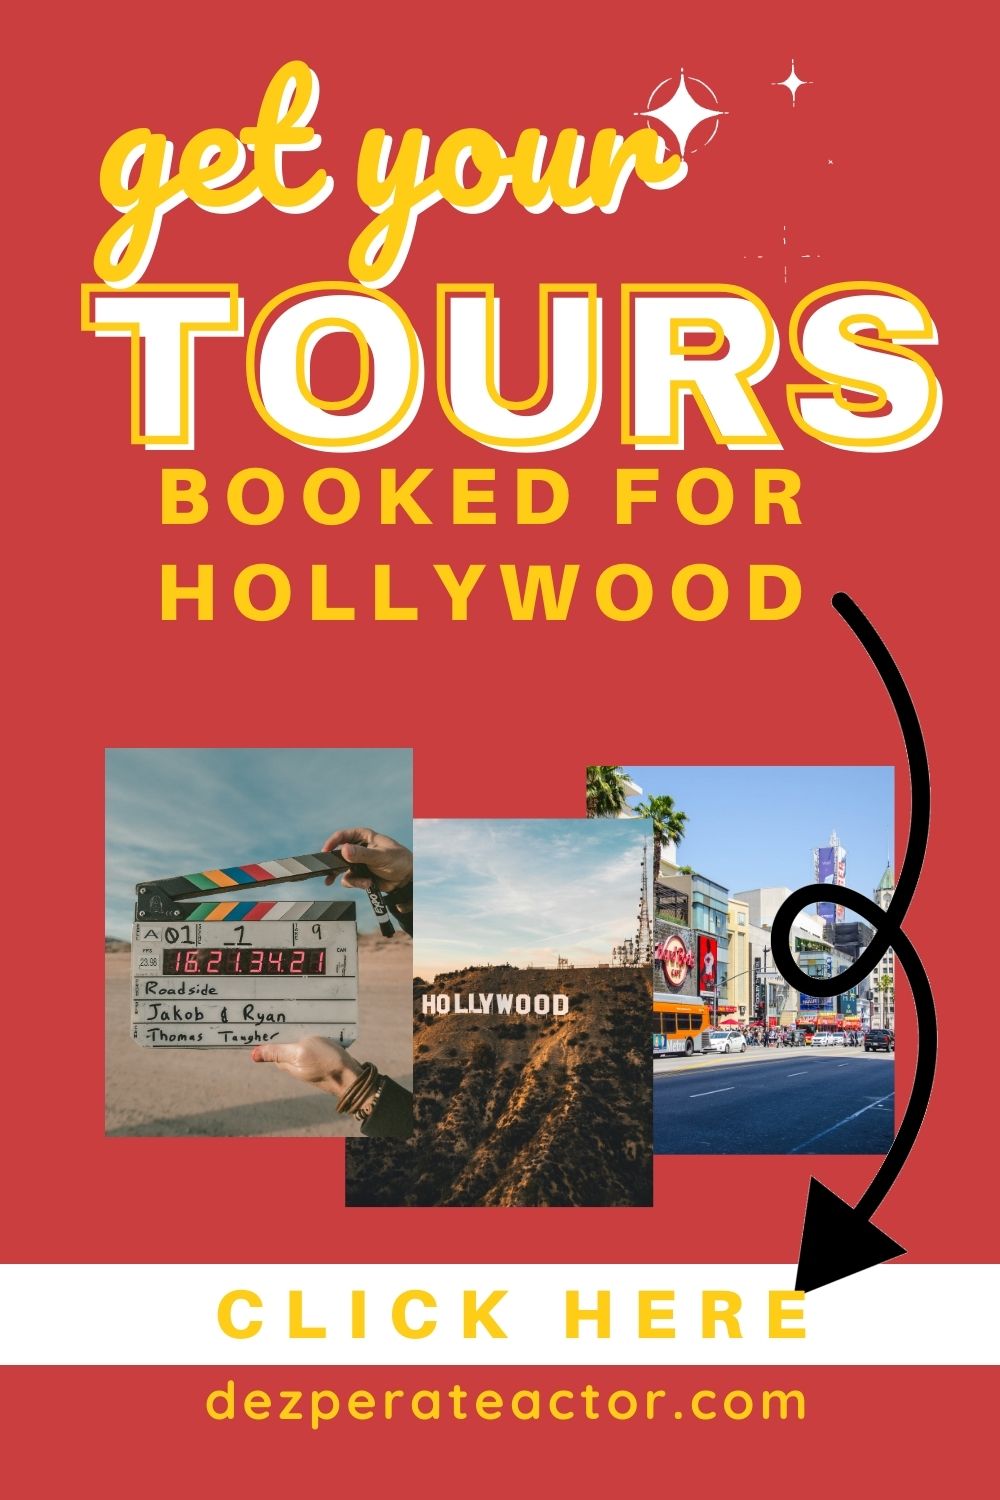 Dezperate Actor Hollywood Tours